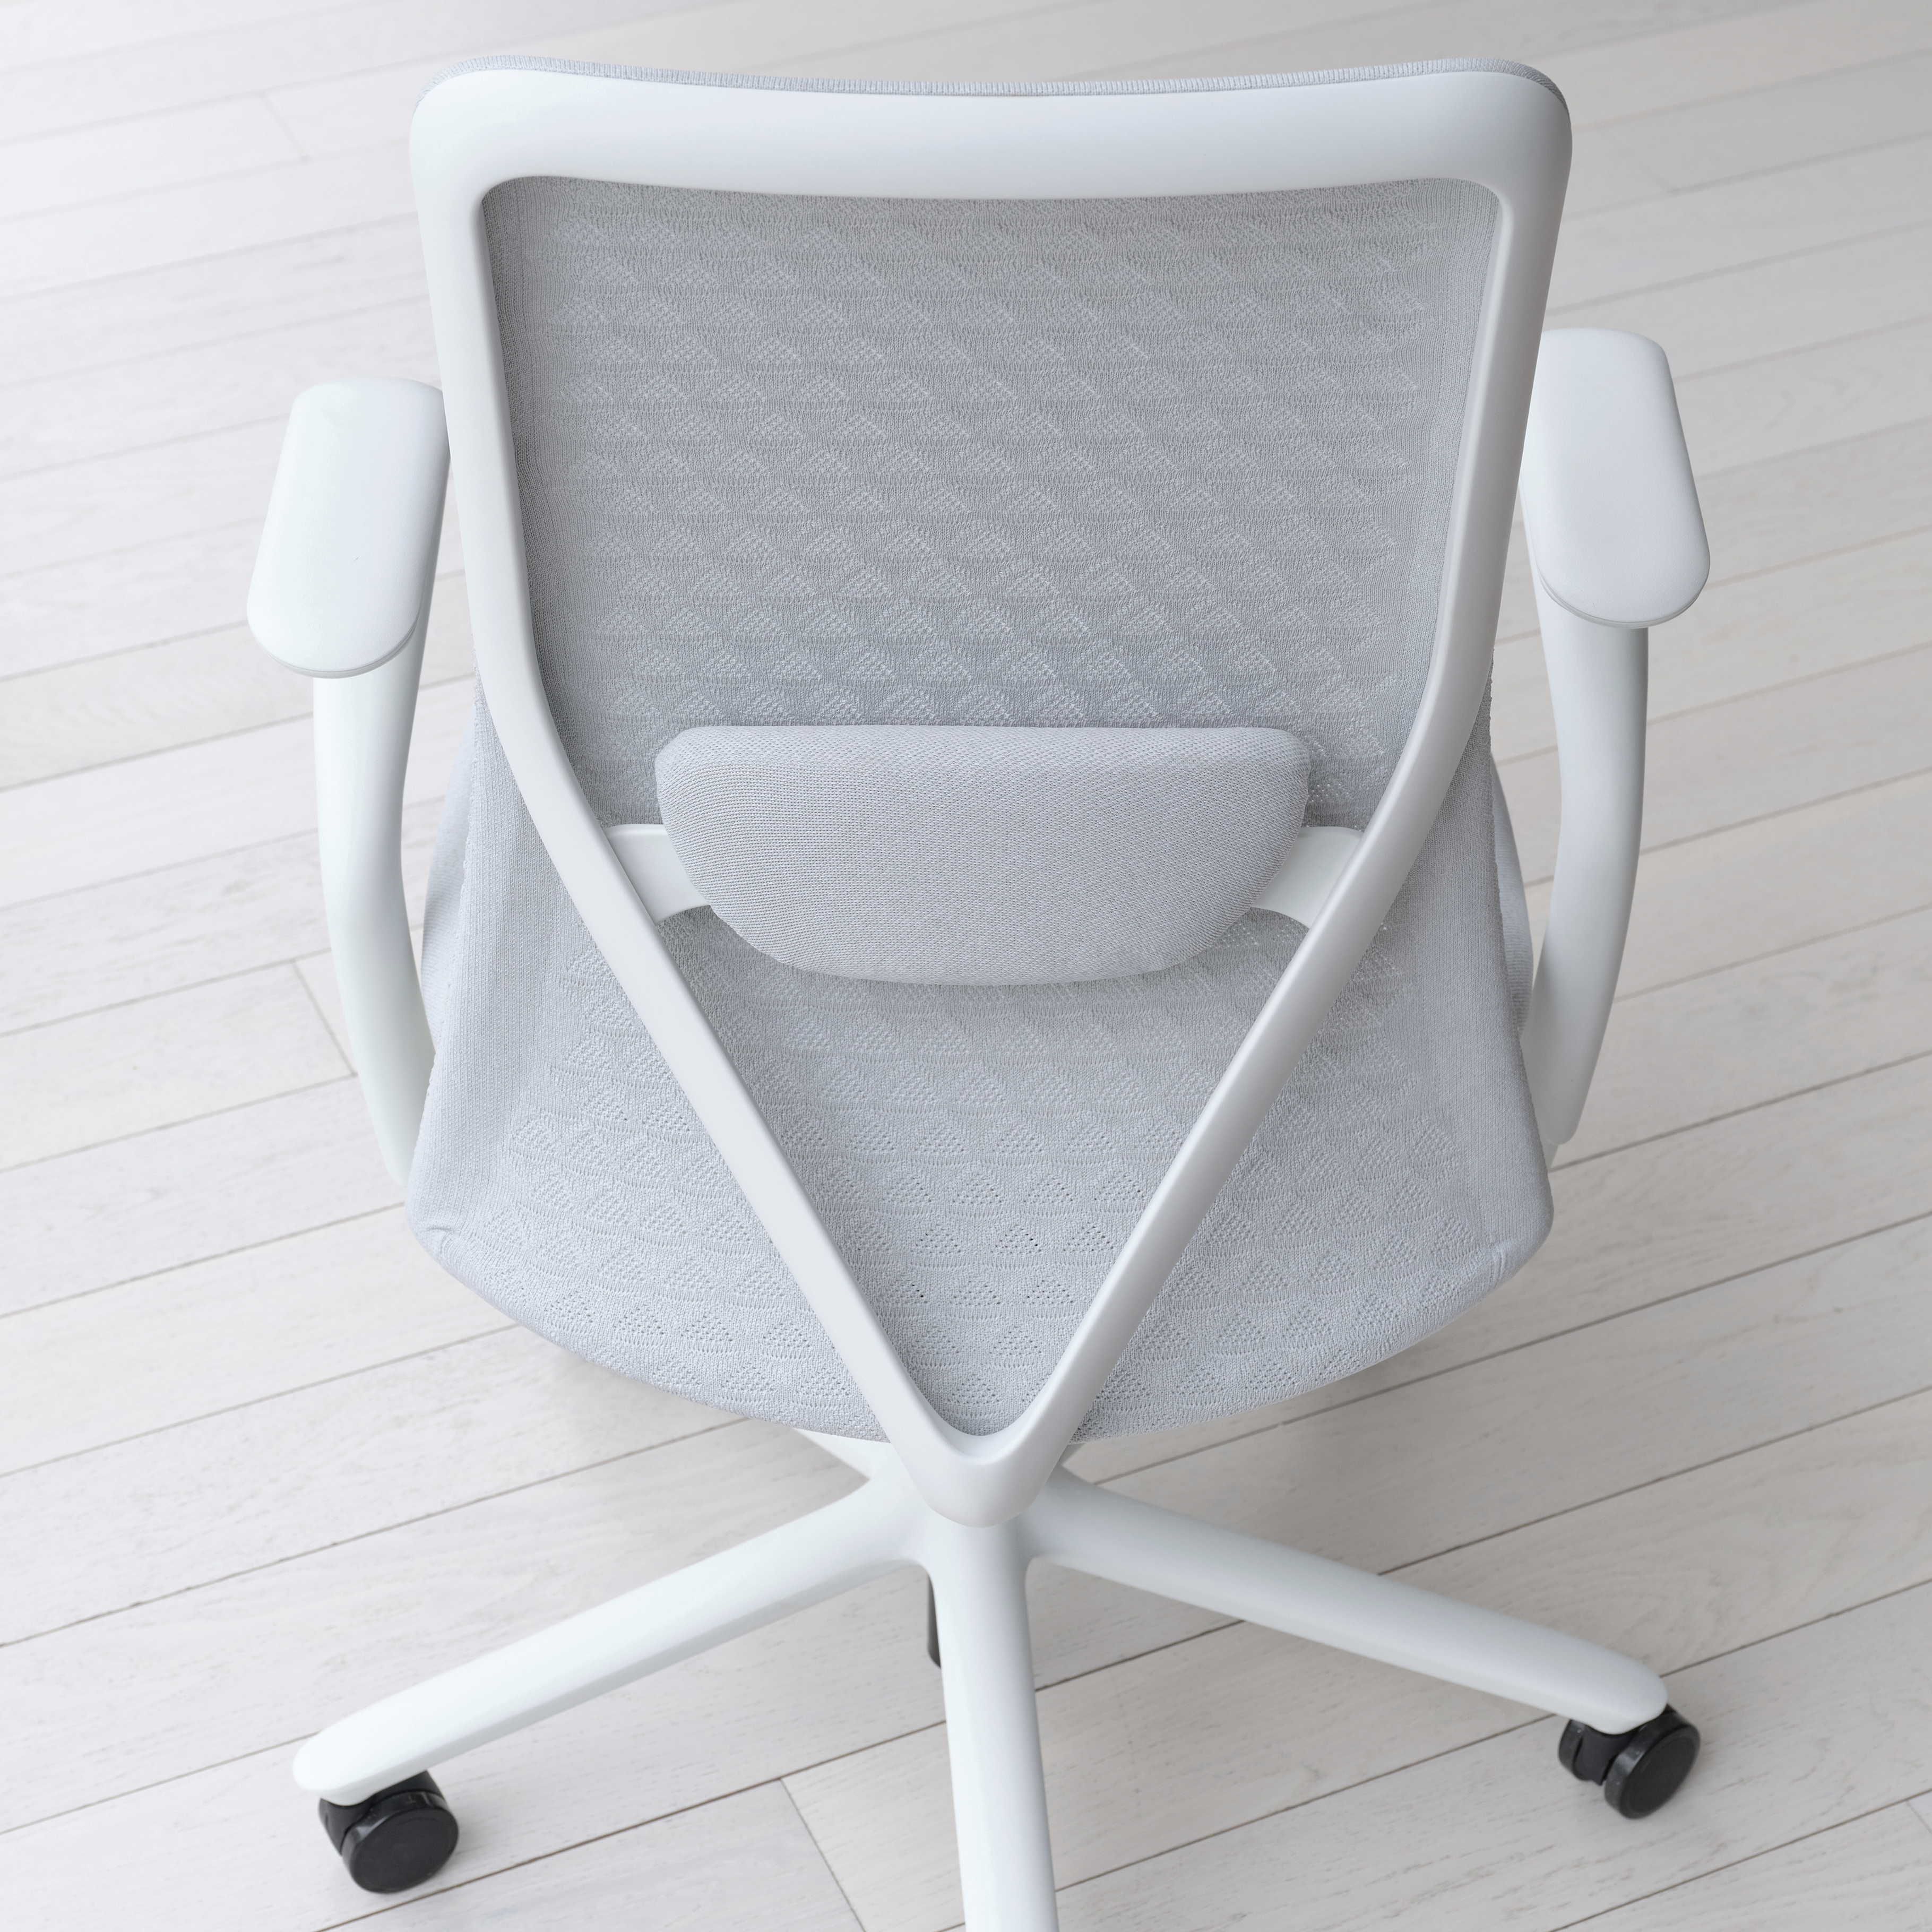 The mesh back of the light grey-colored Verve Chair.